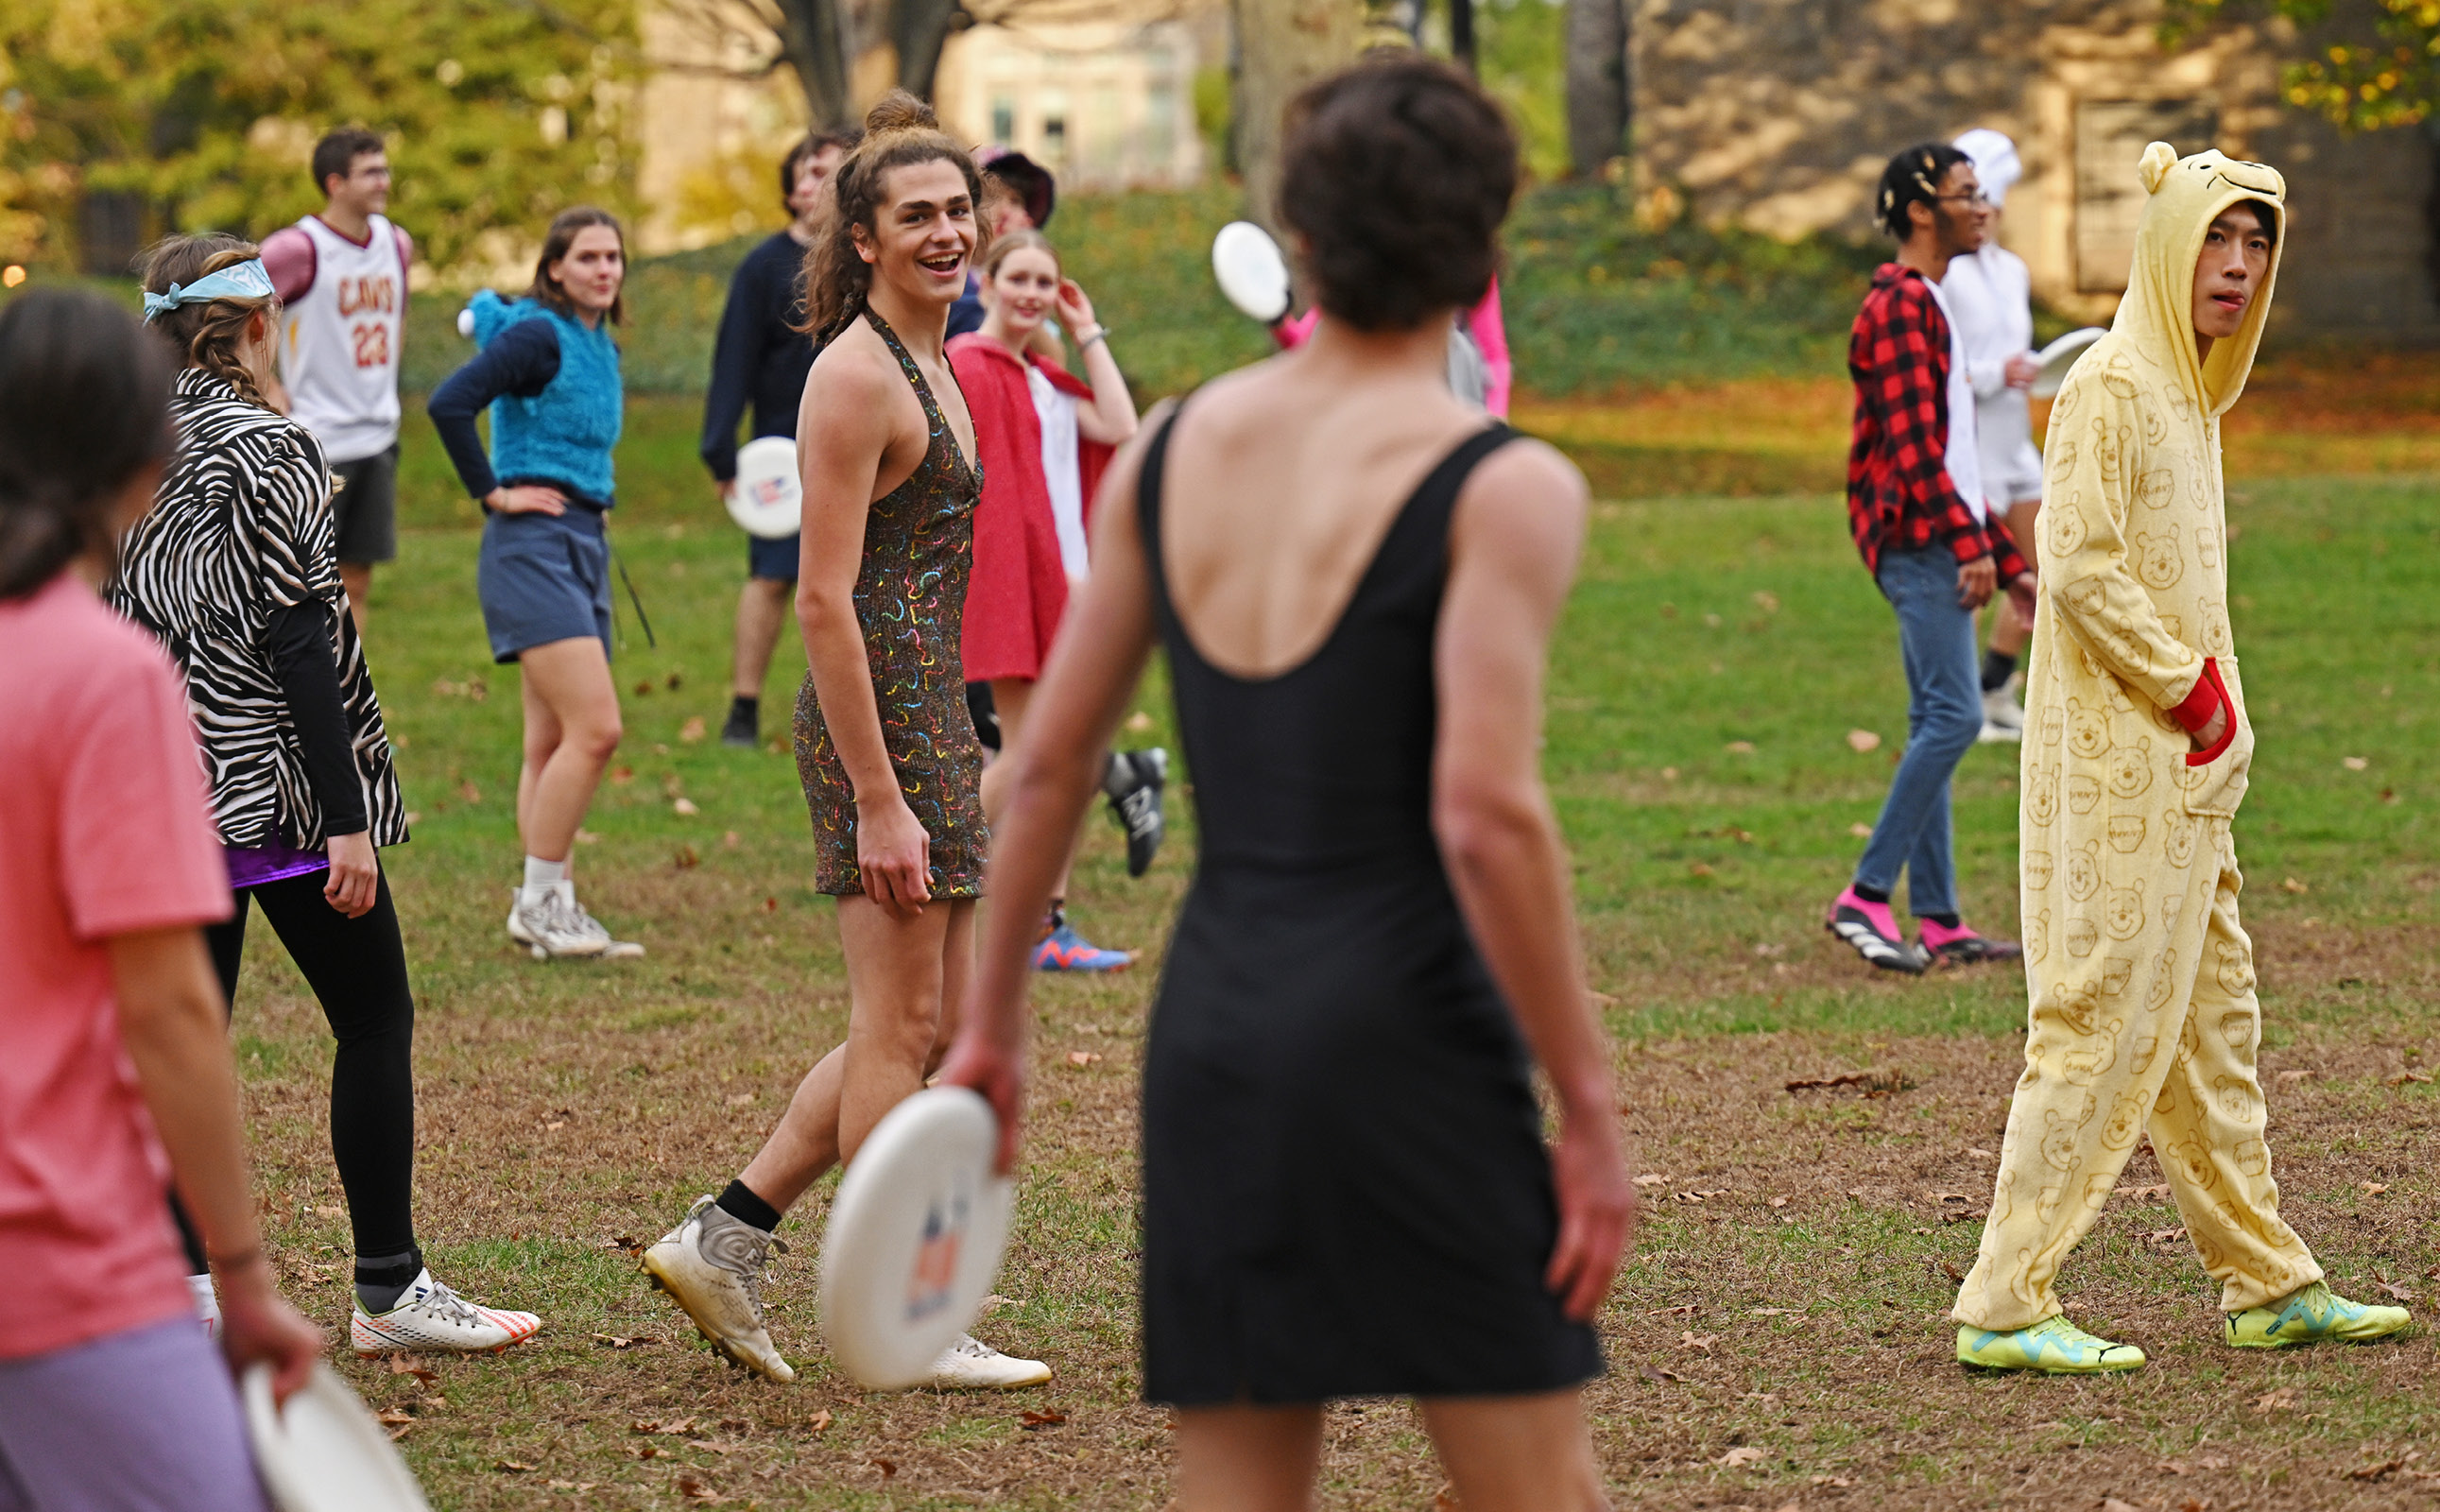 The Men’s and Women’s and non-binary Disc Clubs practiced in costumes for Halloween.